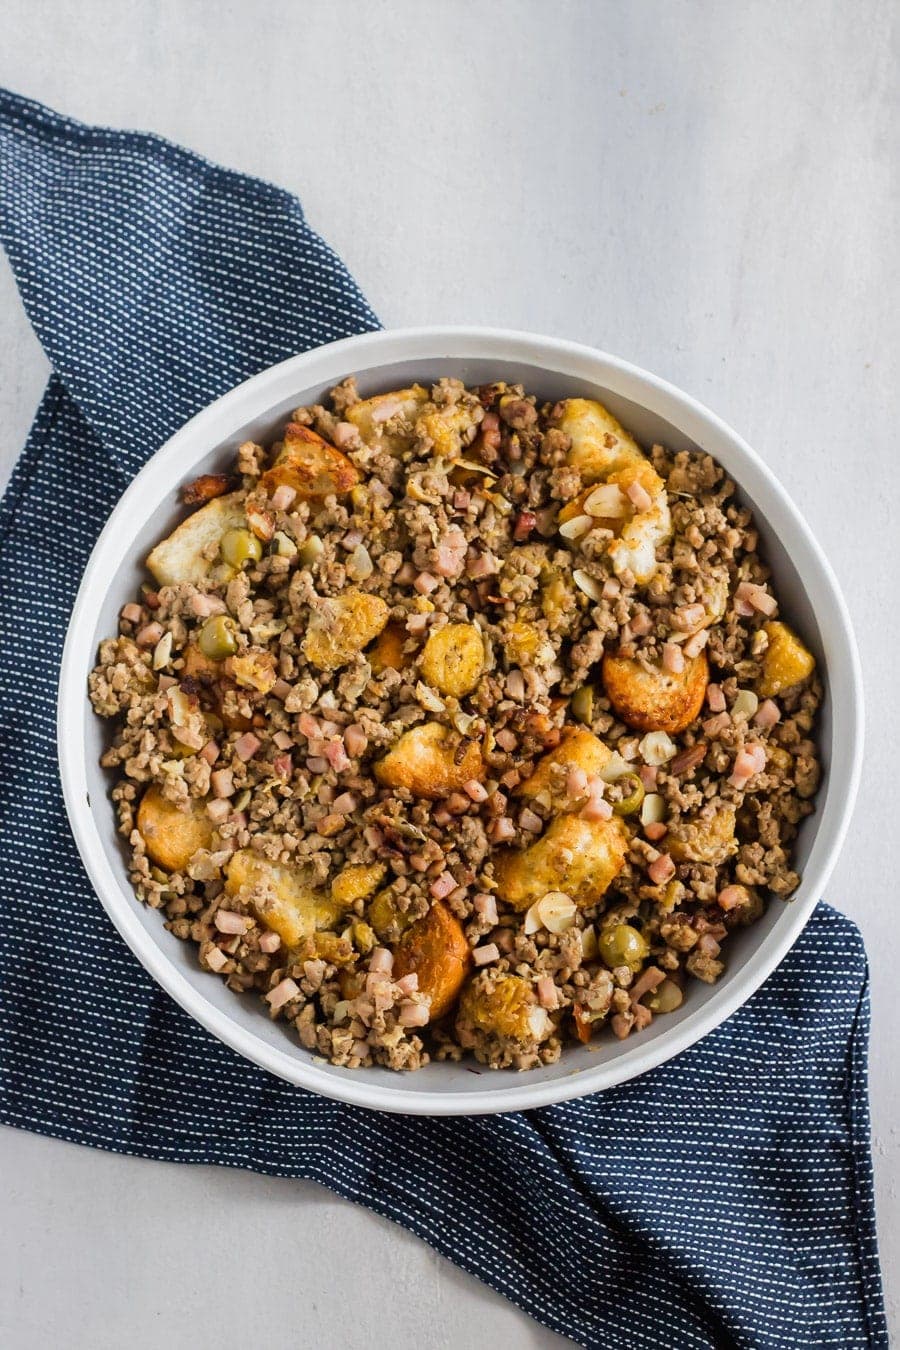 Cubes of toasty French bread mixed with ground beef, ground pork, diced ham, herbs, spices, sliced almonds, chopped olives, and sweet plantains! The BEST stuffing you'll ever try!